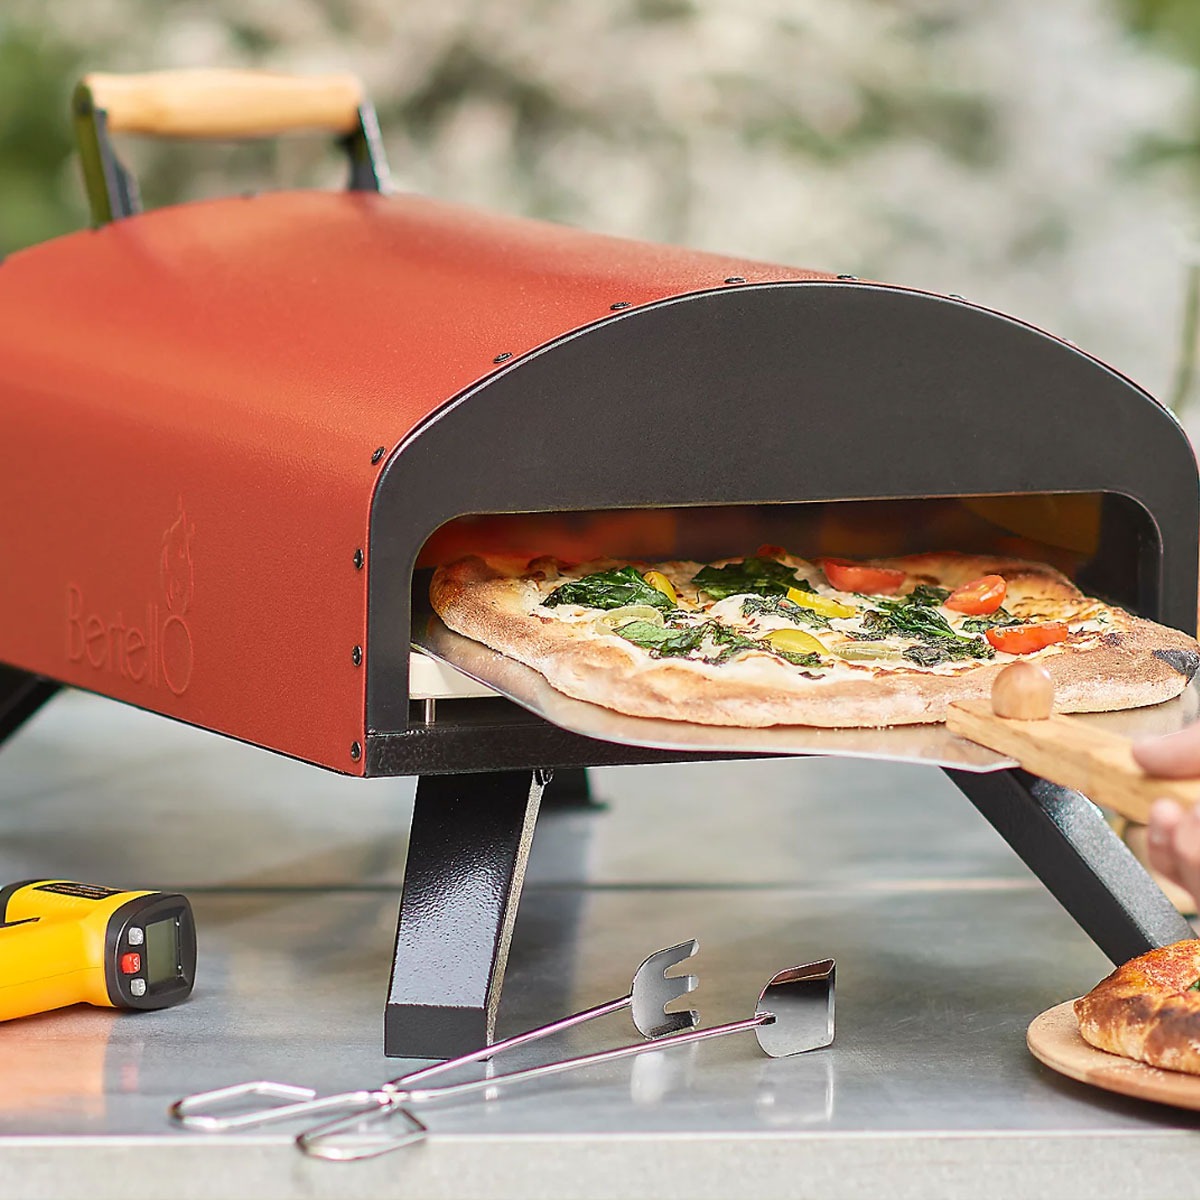 Where Is The Bertello Pizza Oven Made